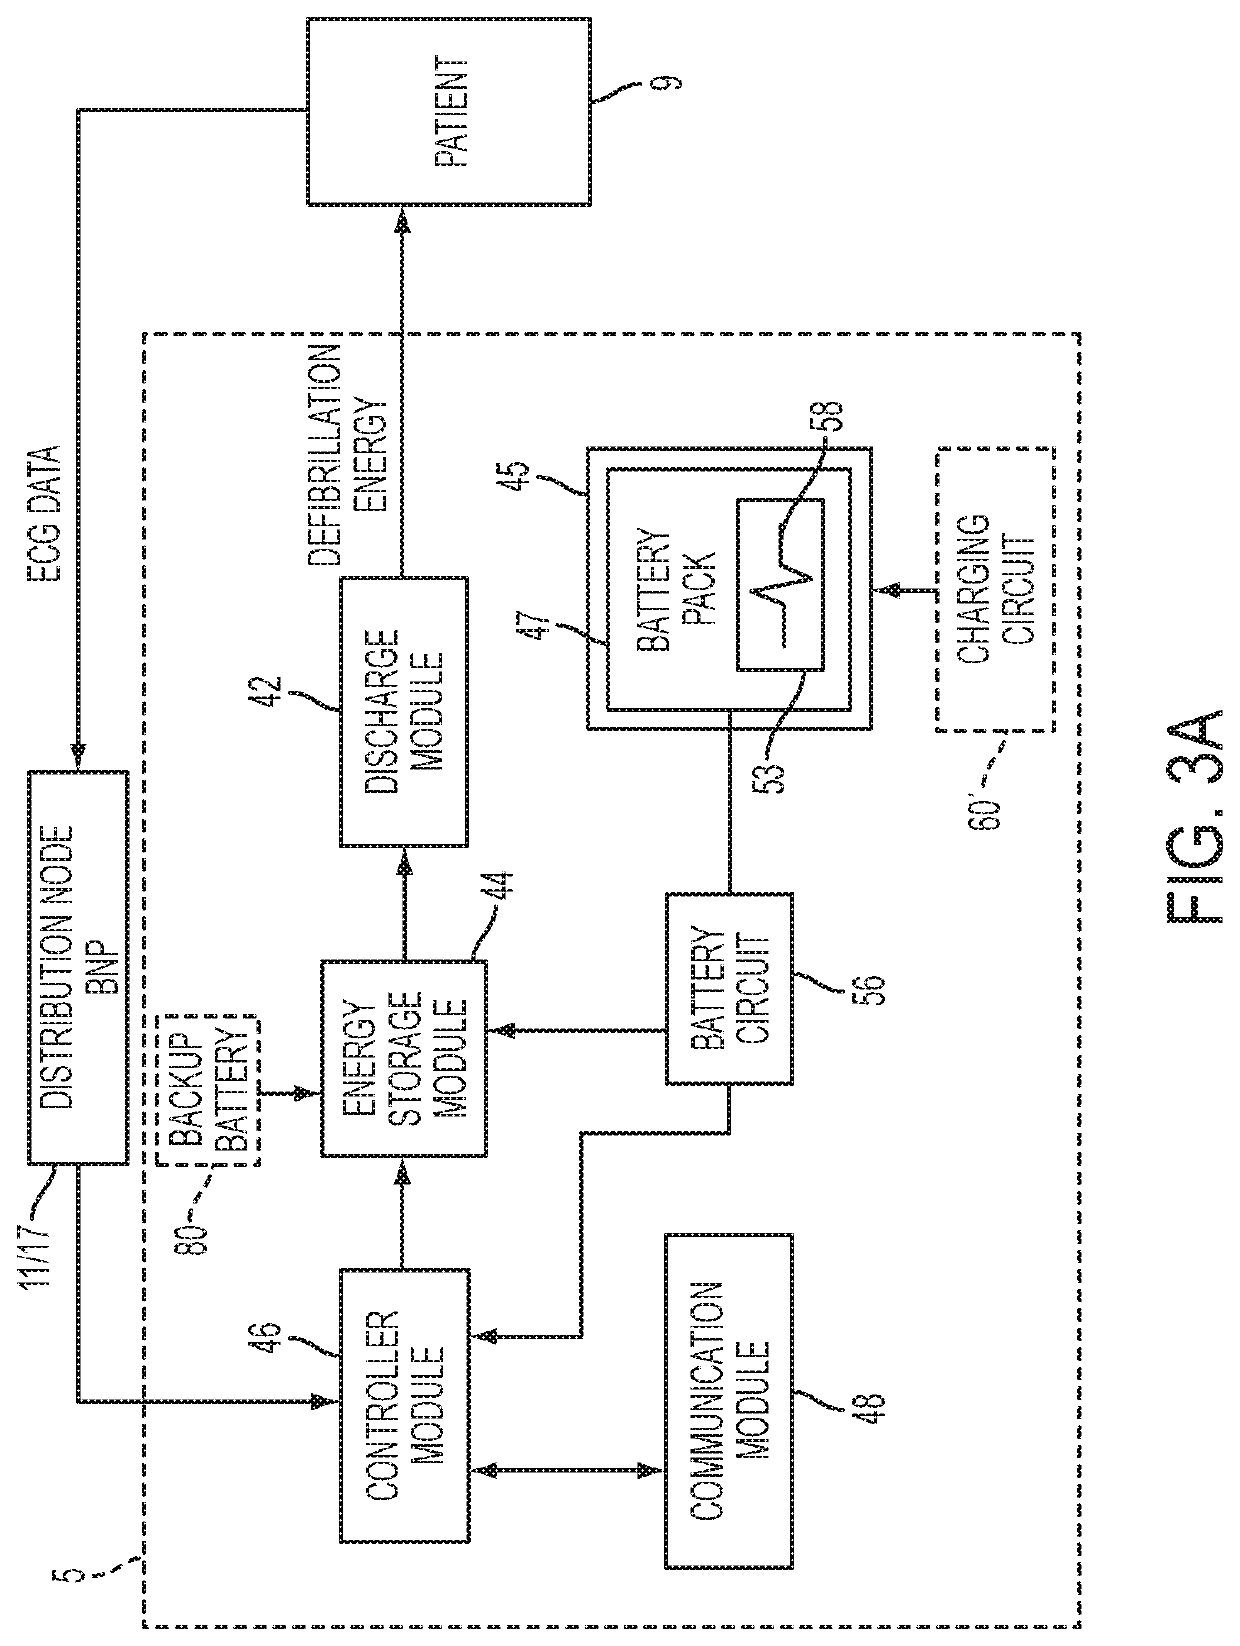 Systems and methods for monitoring battery life status